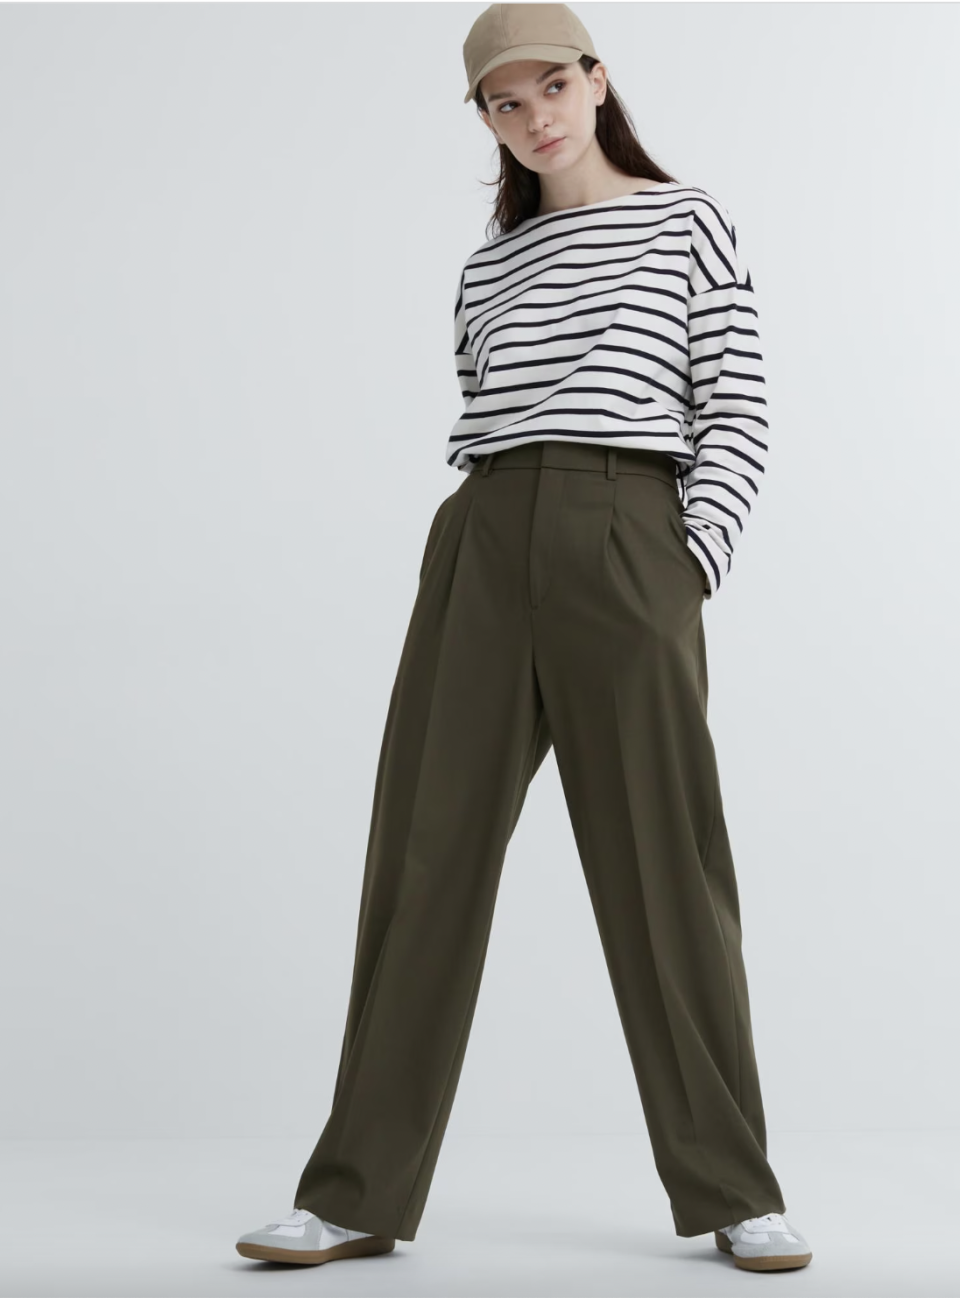 Designed with a slight drape, this wide-leg design is comfortable and premium-looking. (Uniqlo)